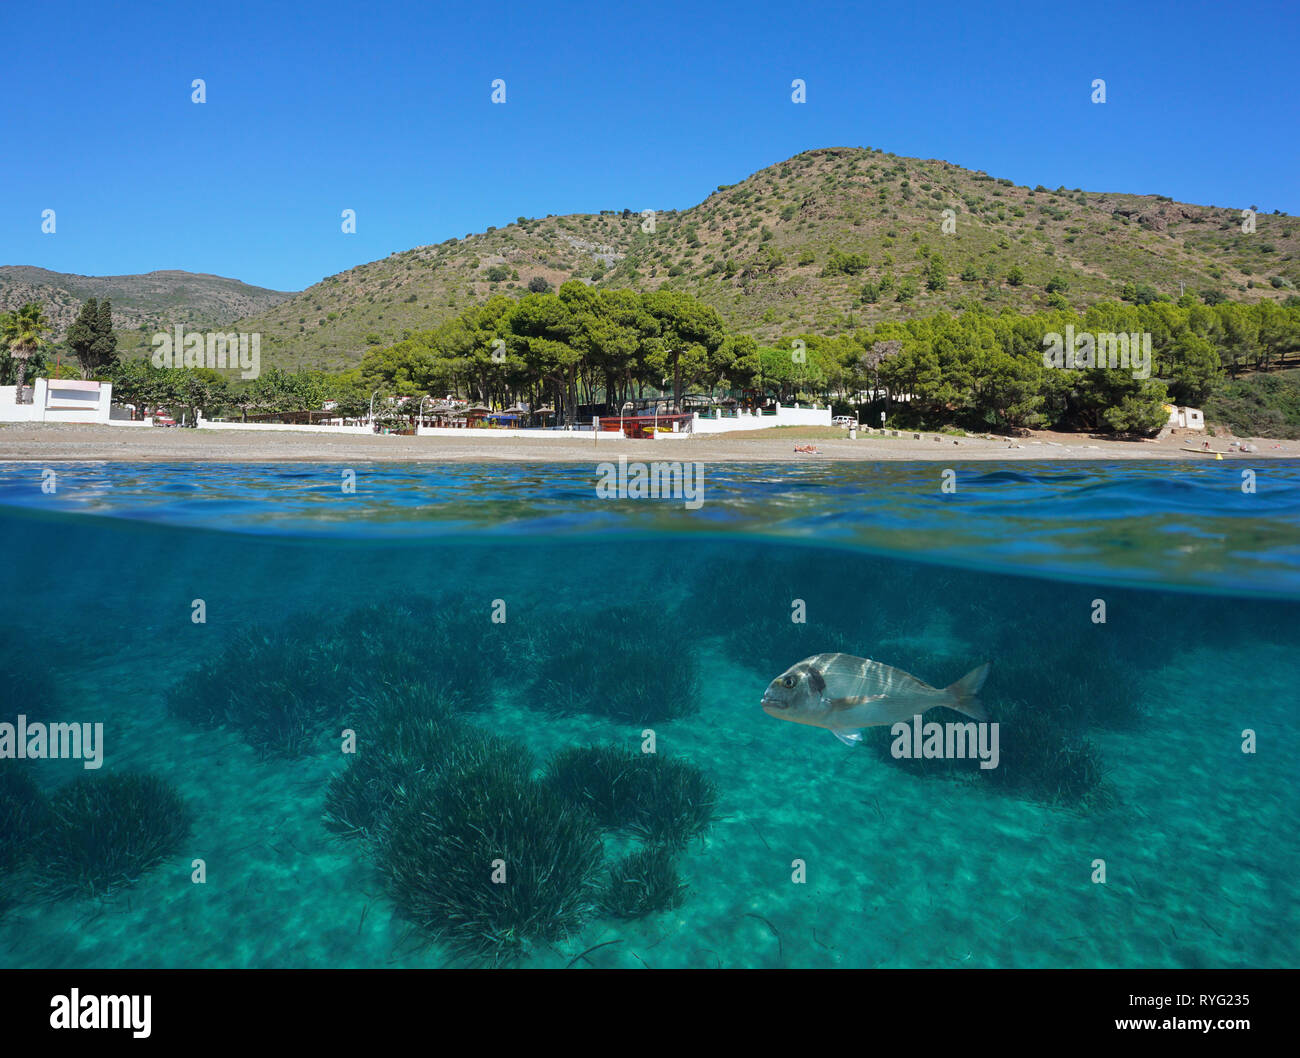 Spain Costa Brava, Cala Montjoi beach shore with a fish and seagrass underwater, Mediterranean sea, Roses, Catalonia, split view over and under water Stock Photo